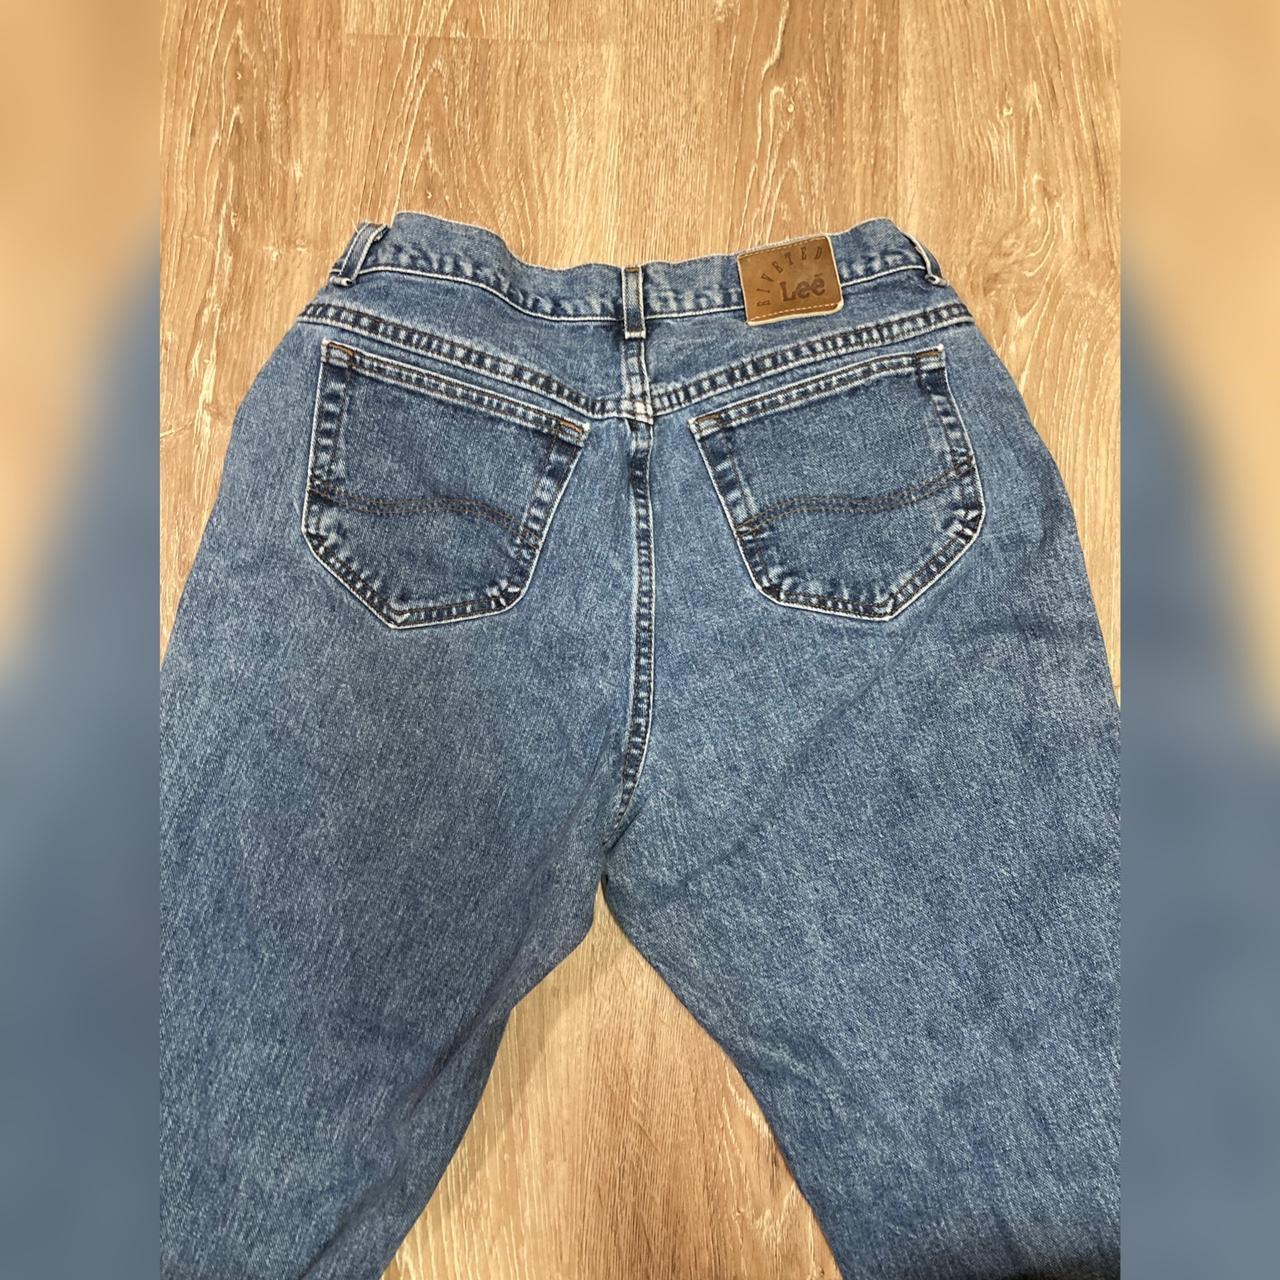 Lee Riveted Jeans -tagged 16 long -100%... - Depop